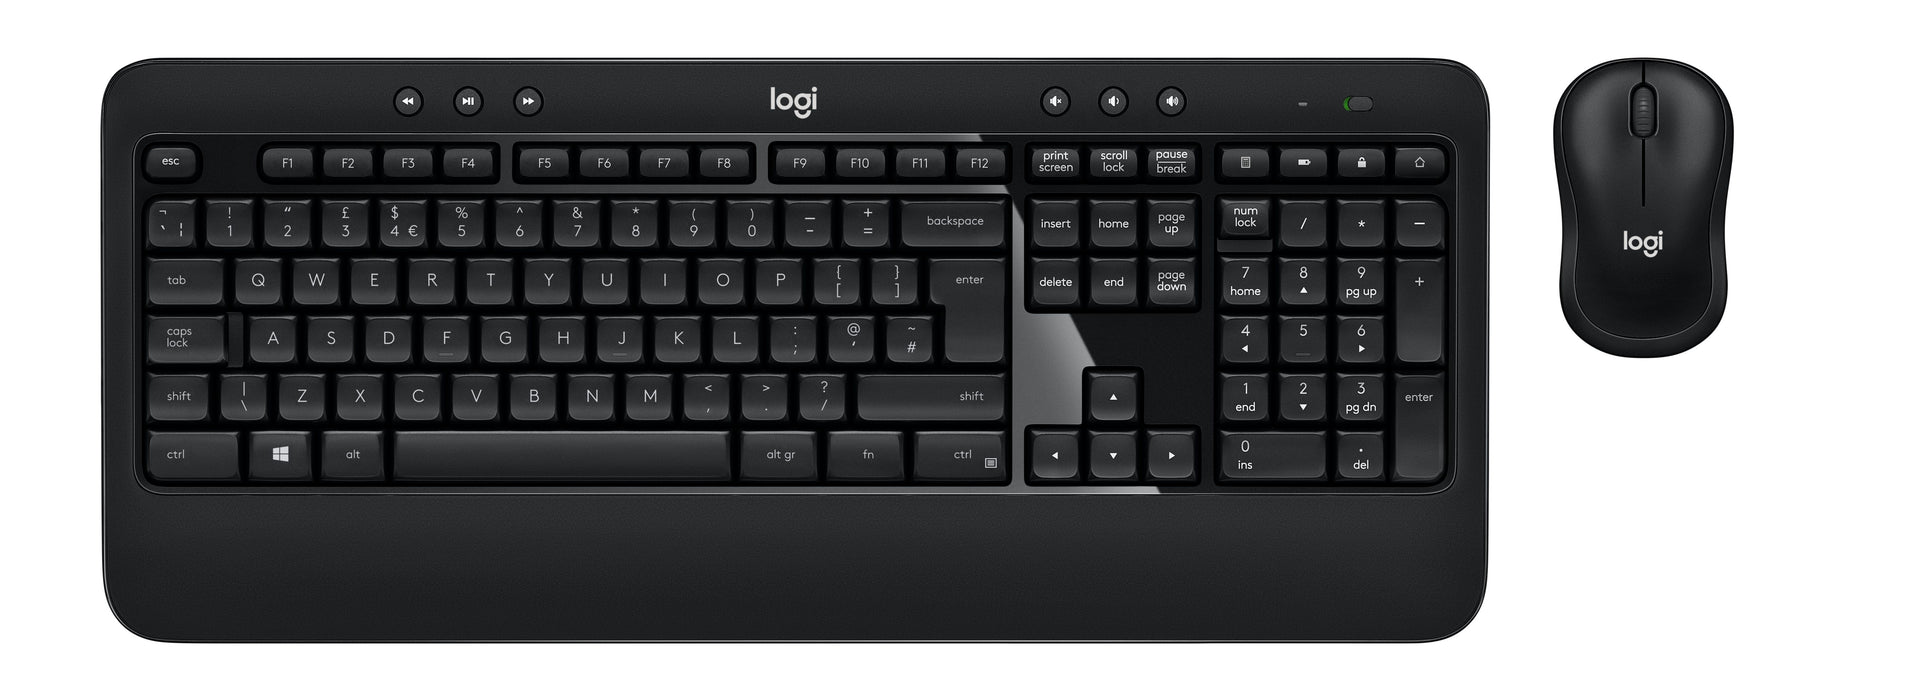 Logitech ADVANCED Combo Wireless Keyboard and Mouse, Full-size (100%), Wired, USB, QWERTY, Black, Mouse included